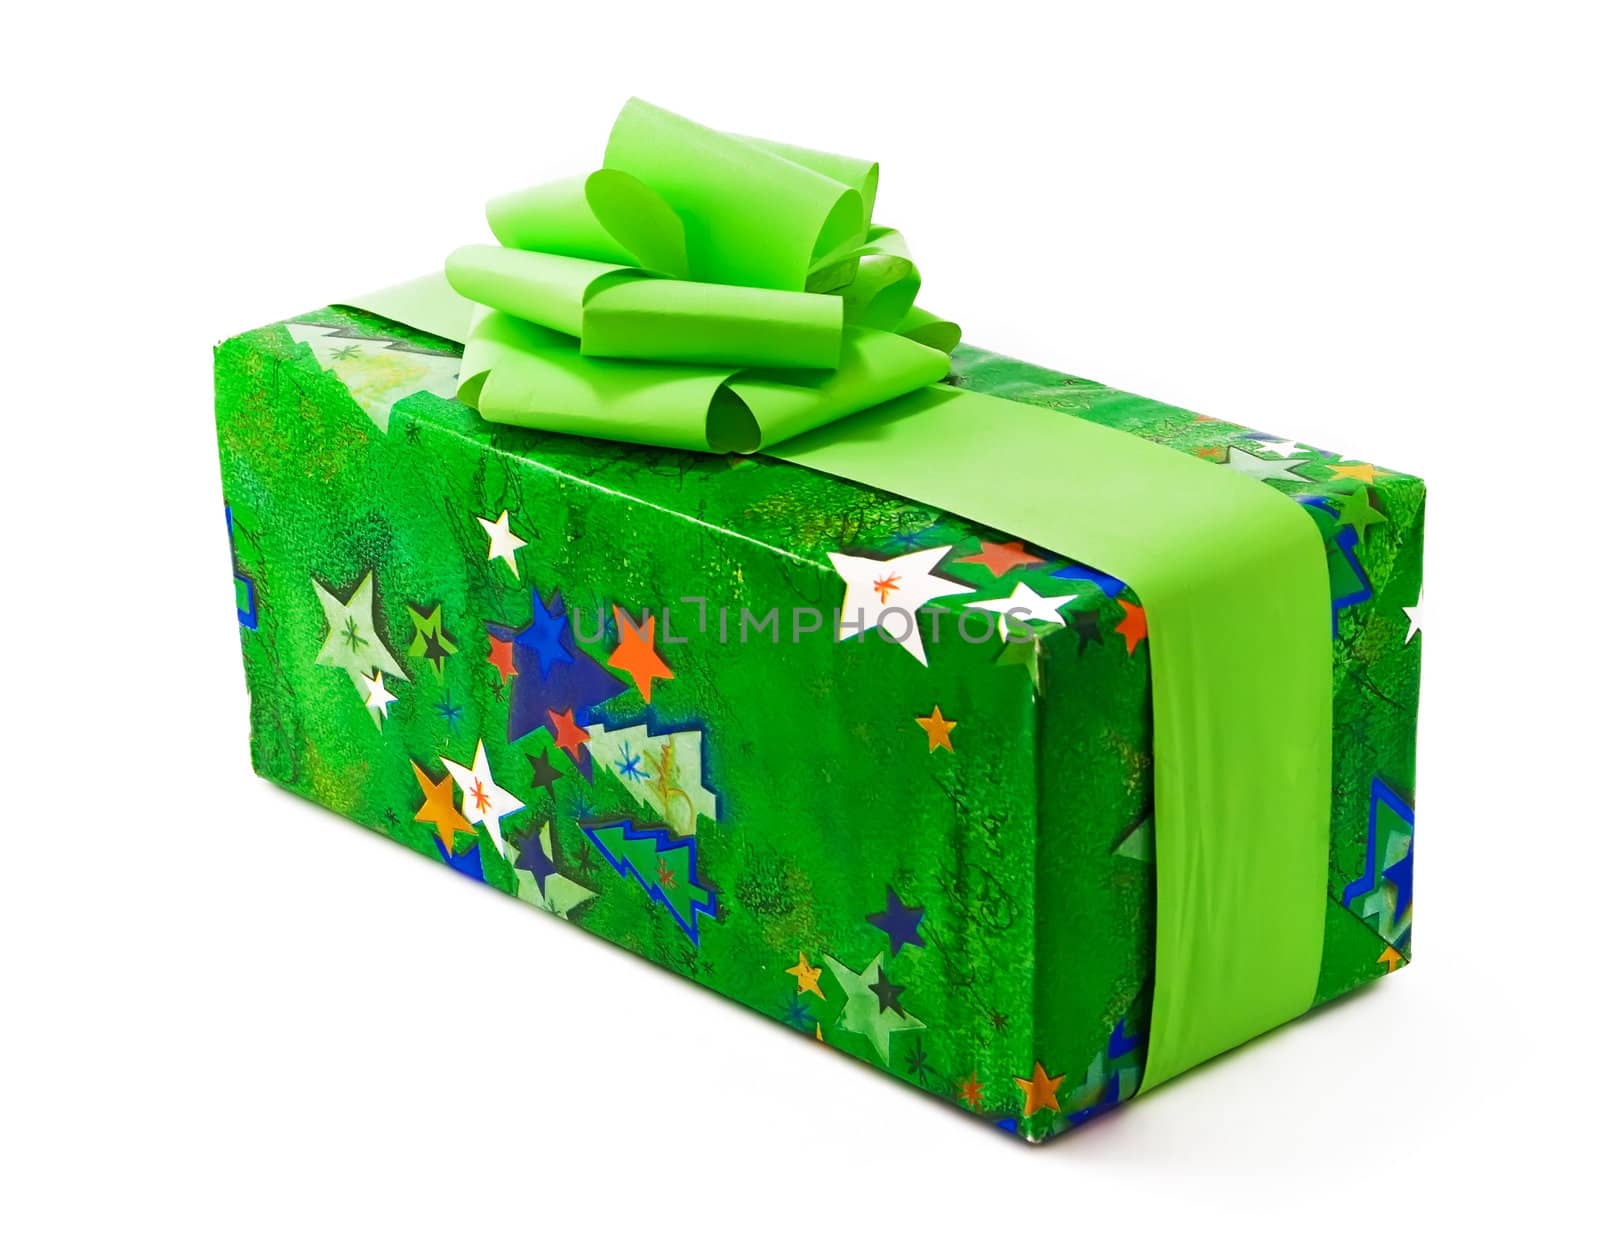 One gift wrapped in green christmas paper with green bows. Ideal Christmas Present type Photo.